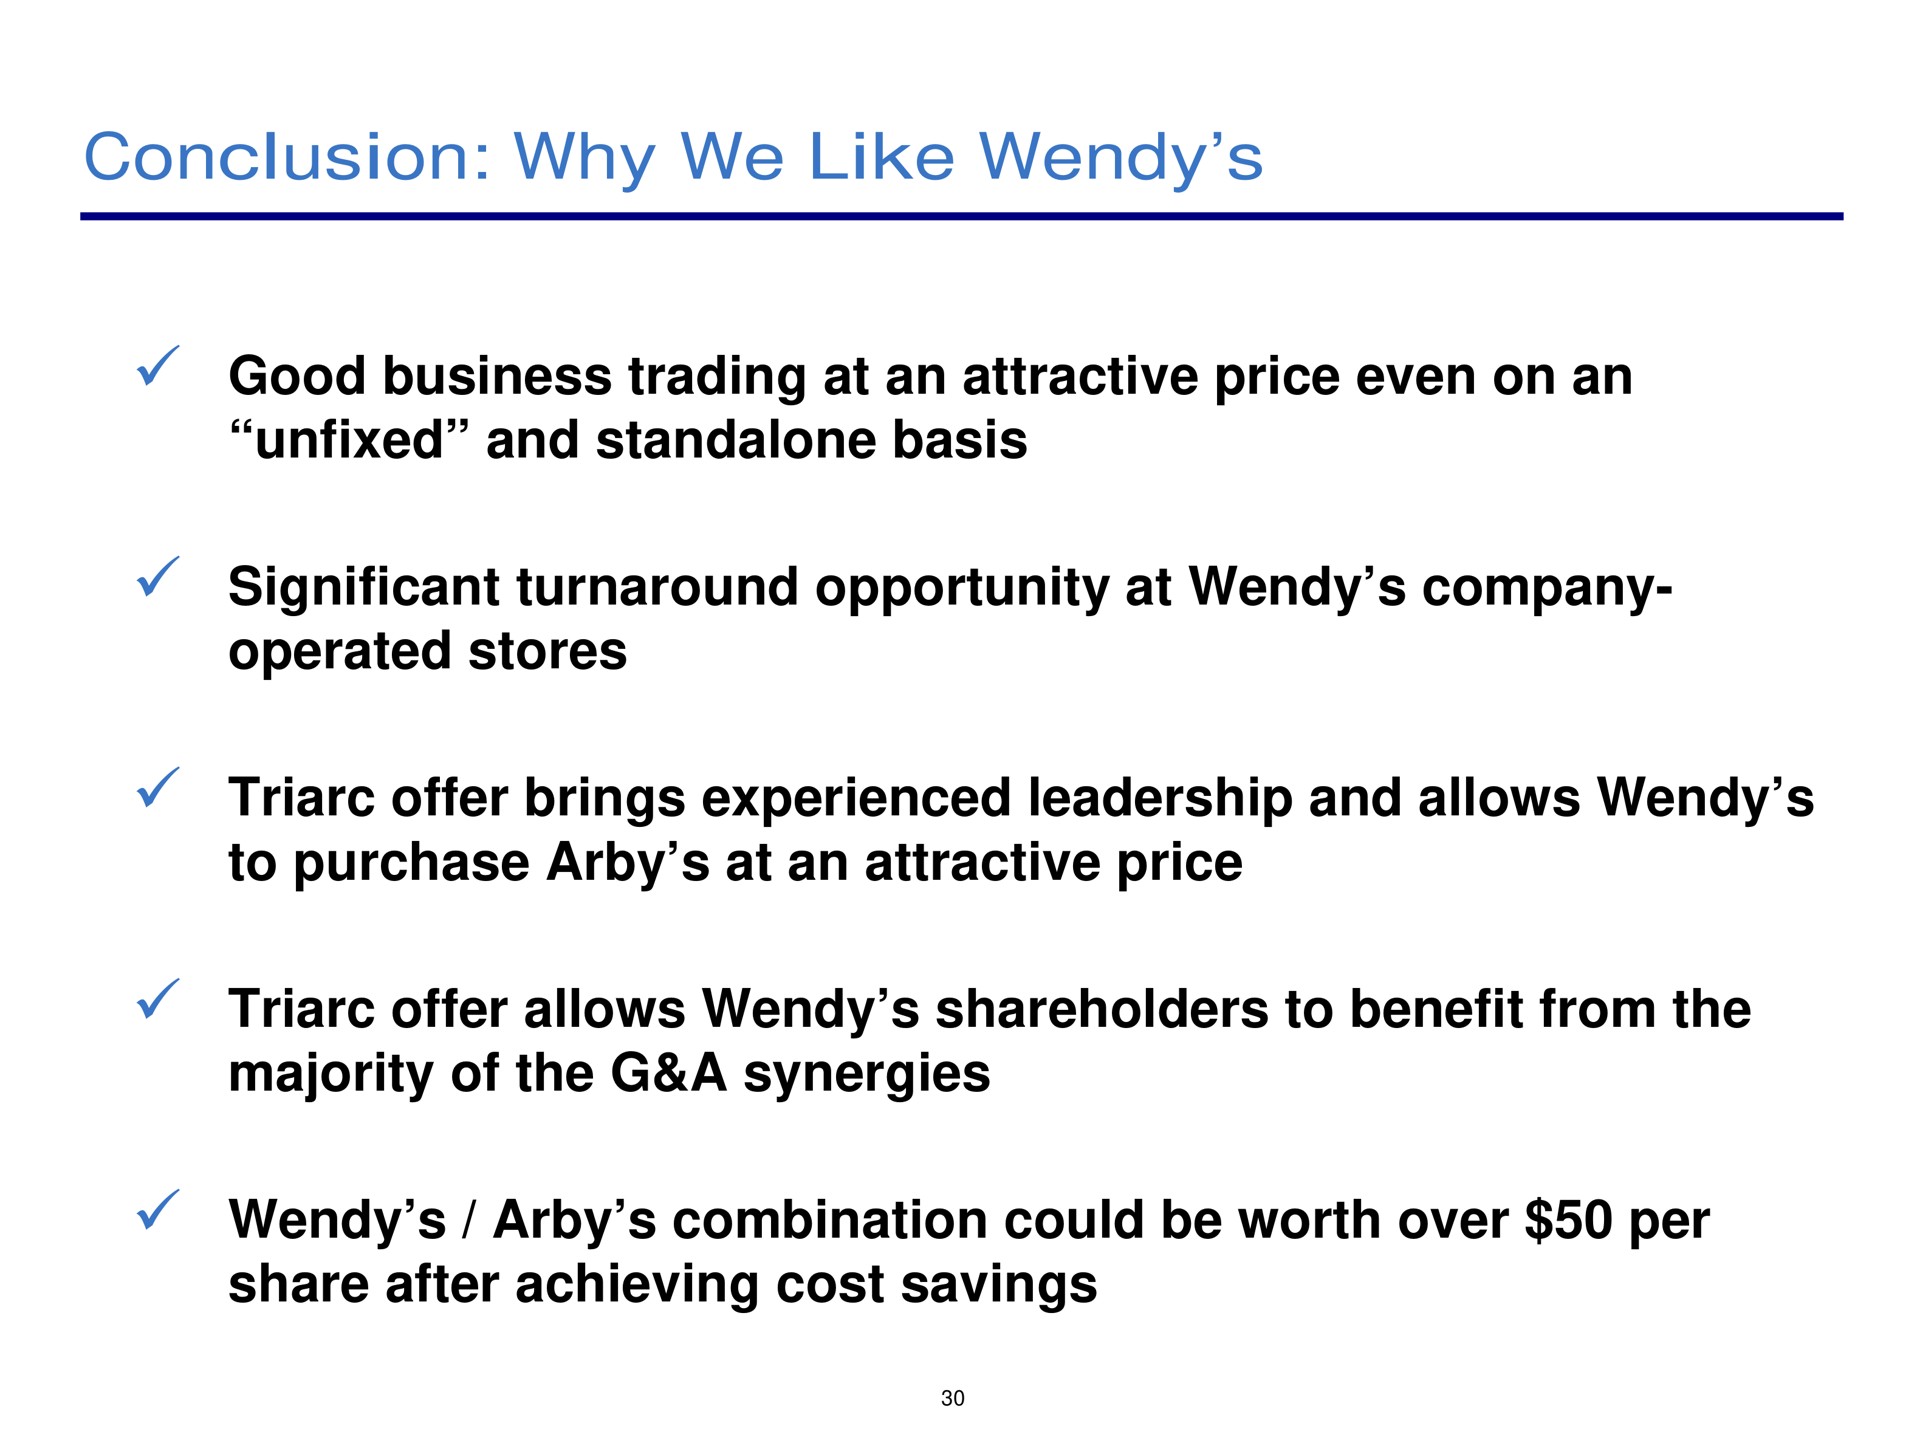 conclusion why we like good business trading at an attractive price even on an unfixed and basis significant turnaround opportunity at company operated stores offer brings experienced leadership and allows to purchase at an attractive price offer allows shareholders to benefit from the majority of the a synergies combination could be worth over per share after achieving cost savings | Pershing Square